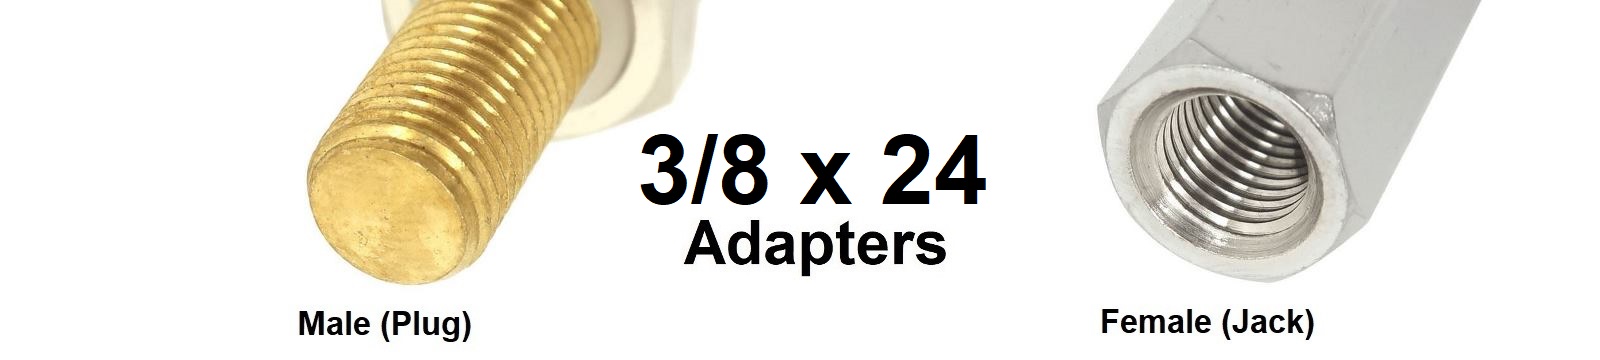 38 x 24 Adapters Category Banner - Max-Gain Systems, Inc.